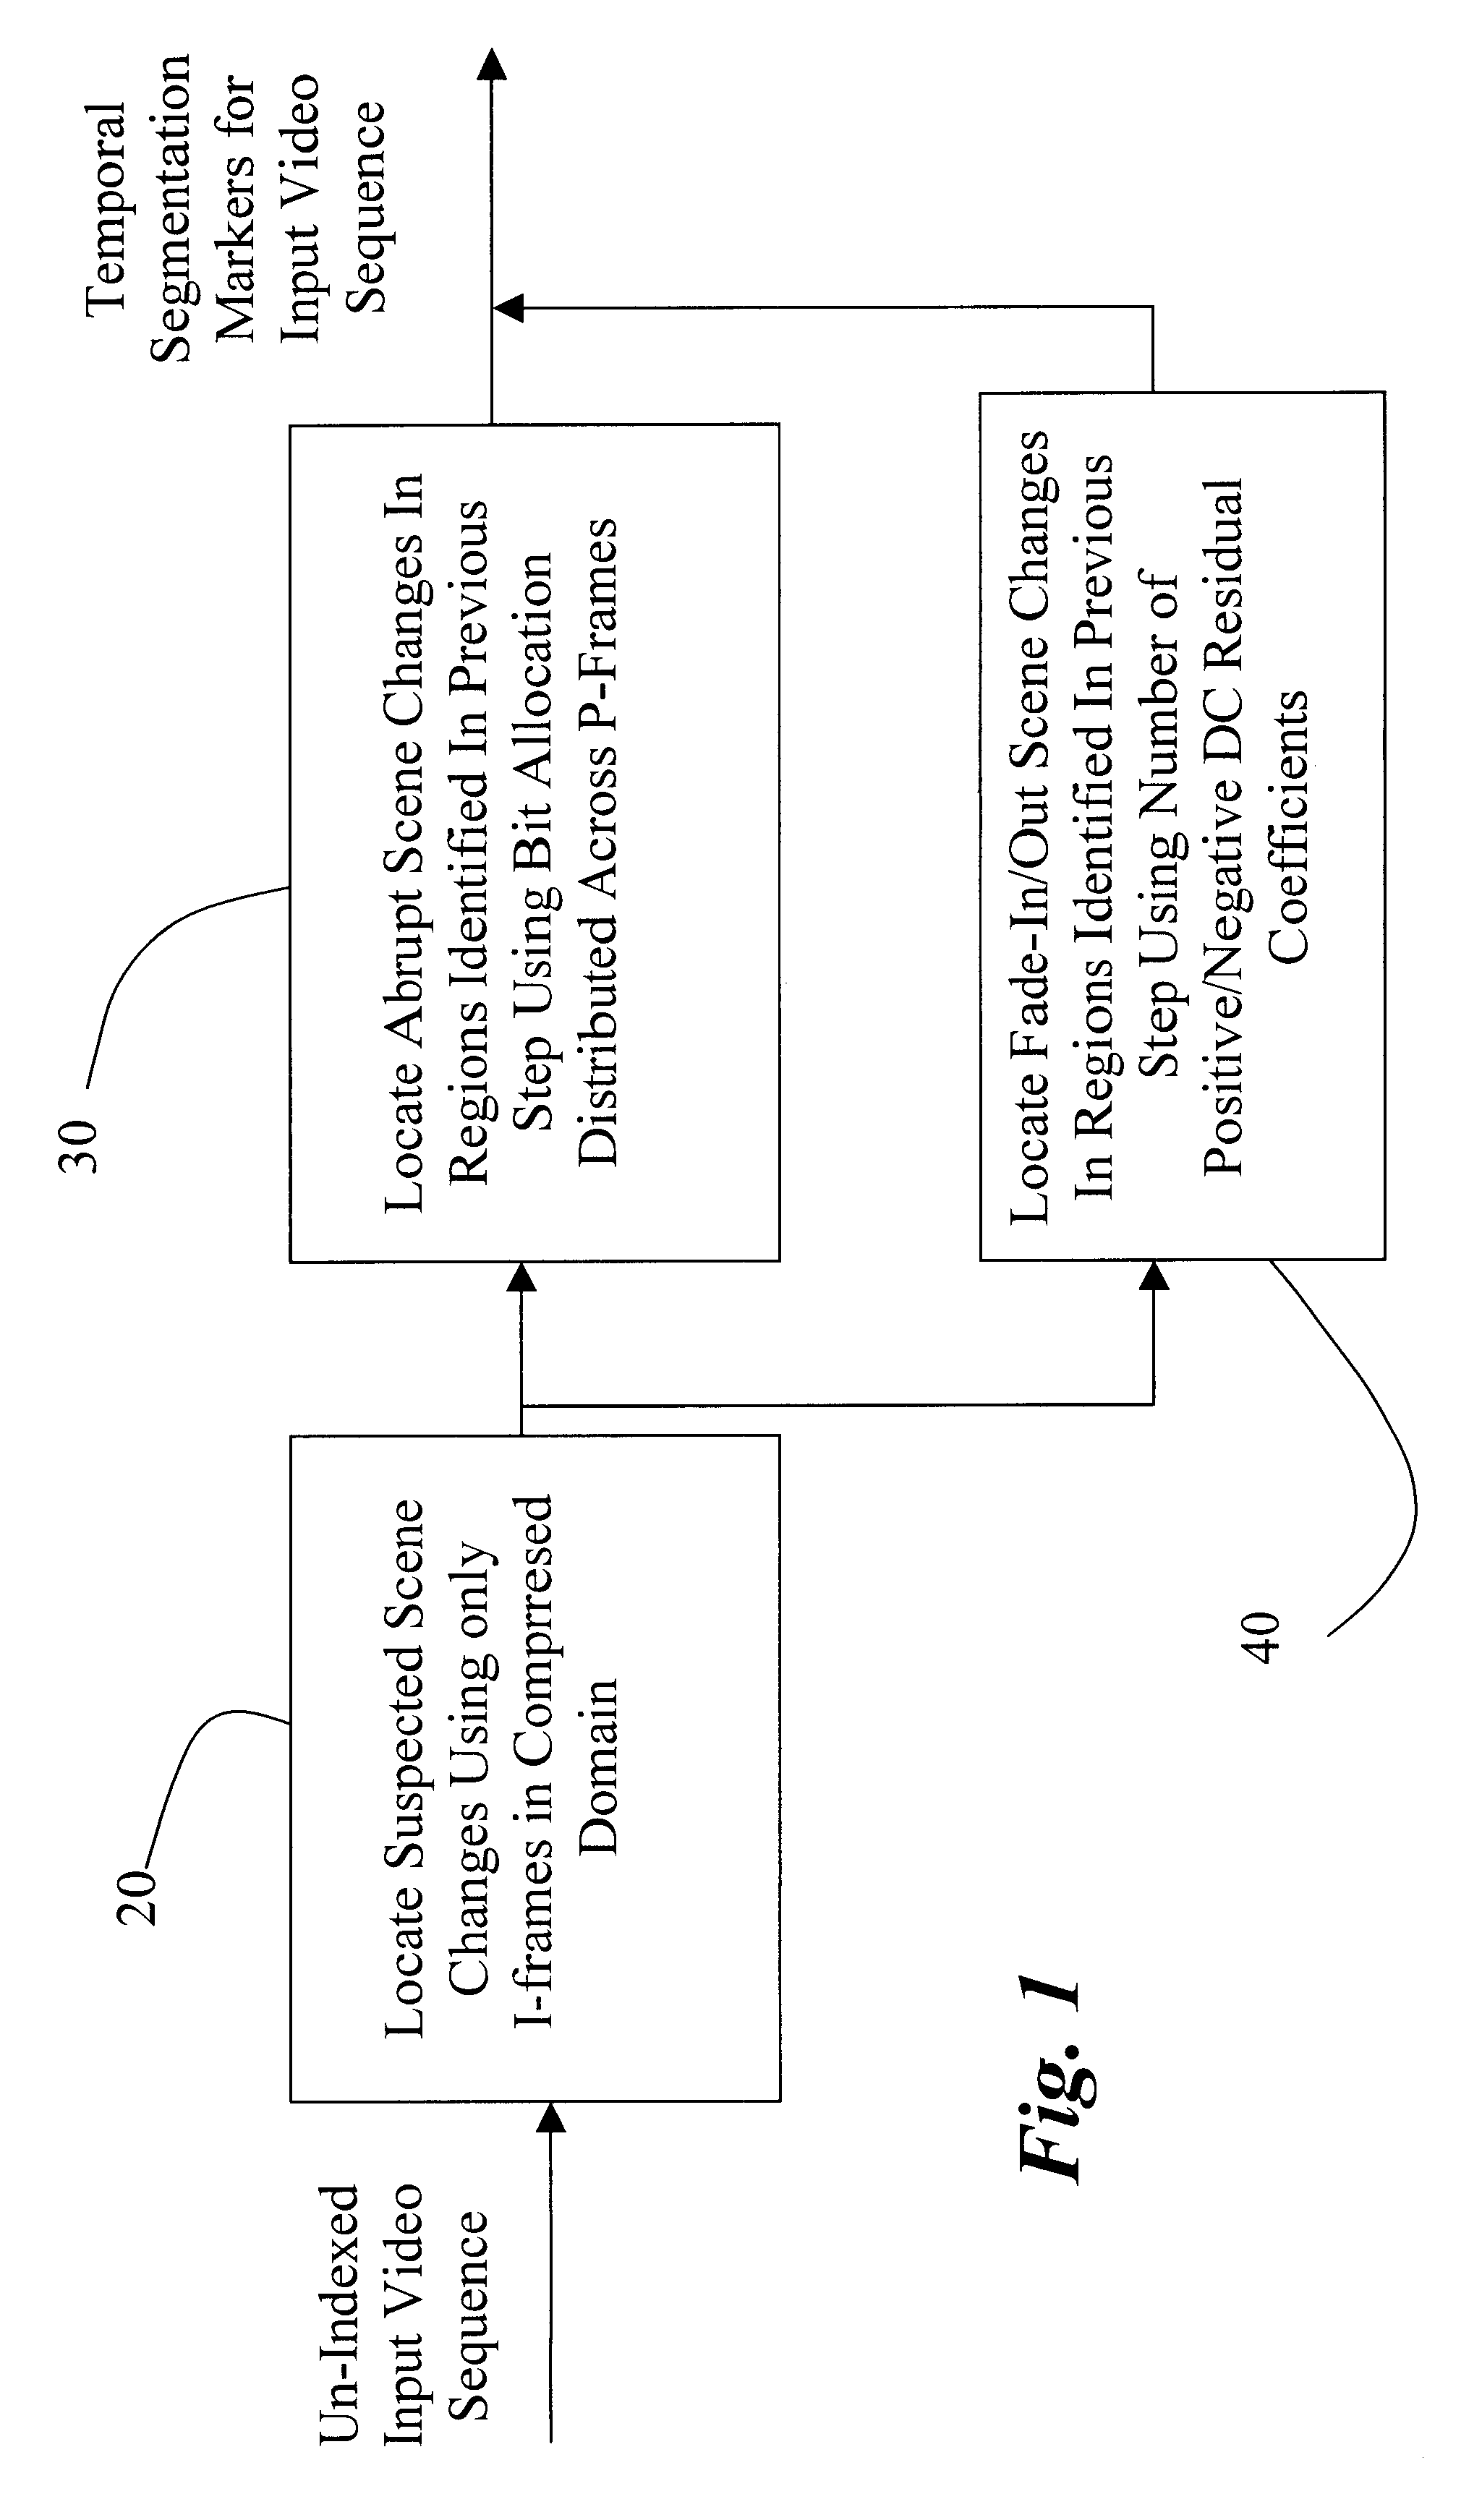 Methods of scene change detection and fade detection for indexing of video sequences